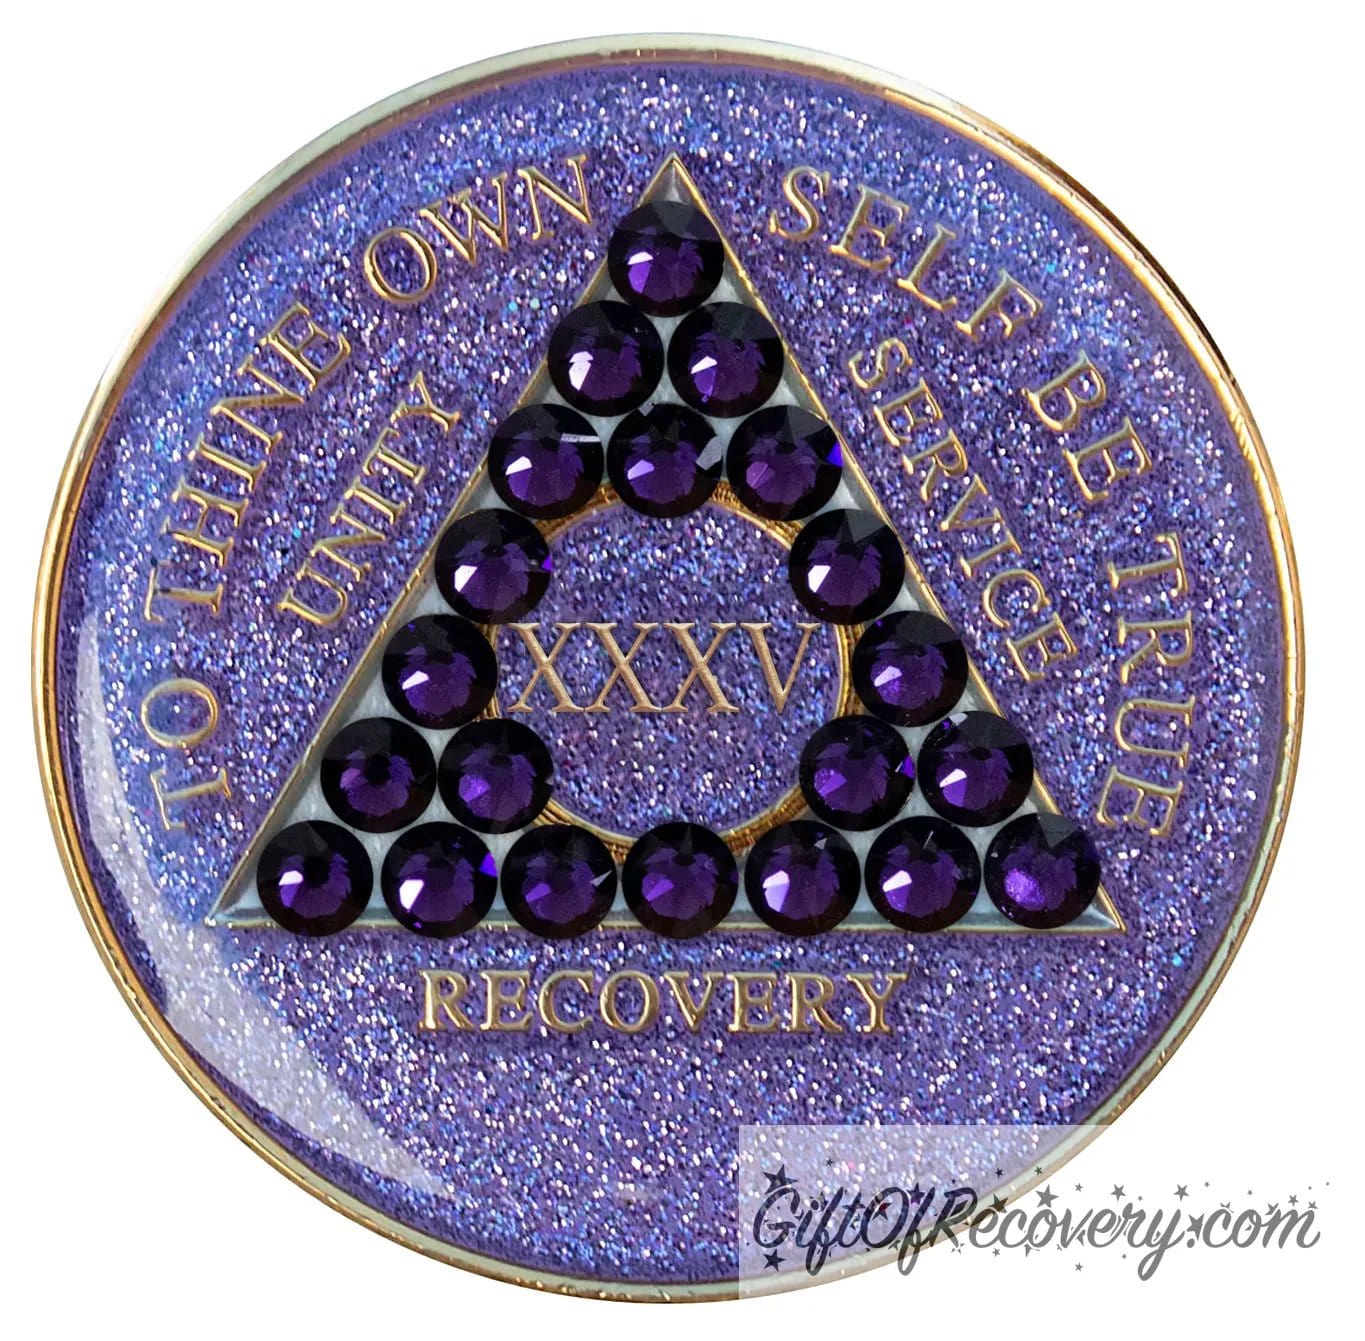 35 year glitter purple AA medallion with 21 purple velvet genuine crystals, that create the triangle in middle, and to thine own self be true, unity, service, recovery, the roman numeral in the center of the circle triangle, along with the rim of the recovery medallion, are embossed in 14 gold plated brass, sealed in resin for glossy finish.